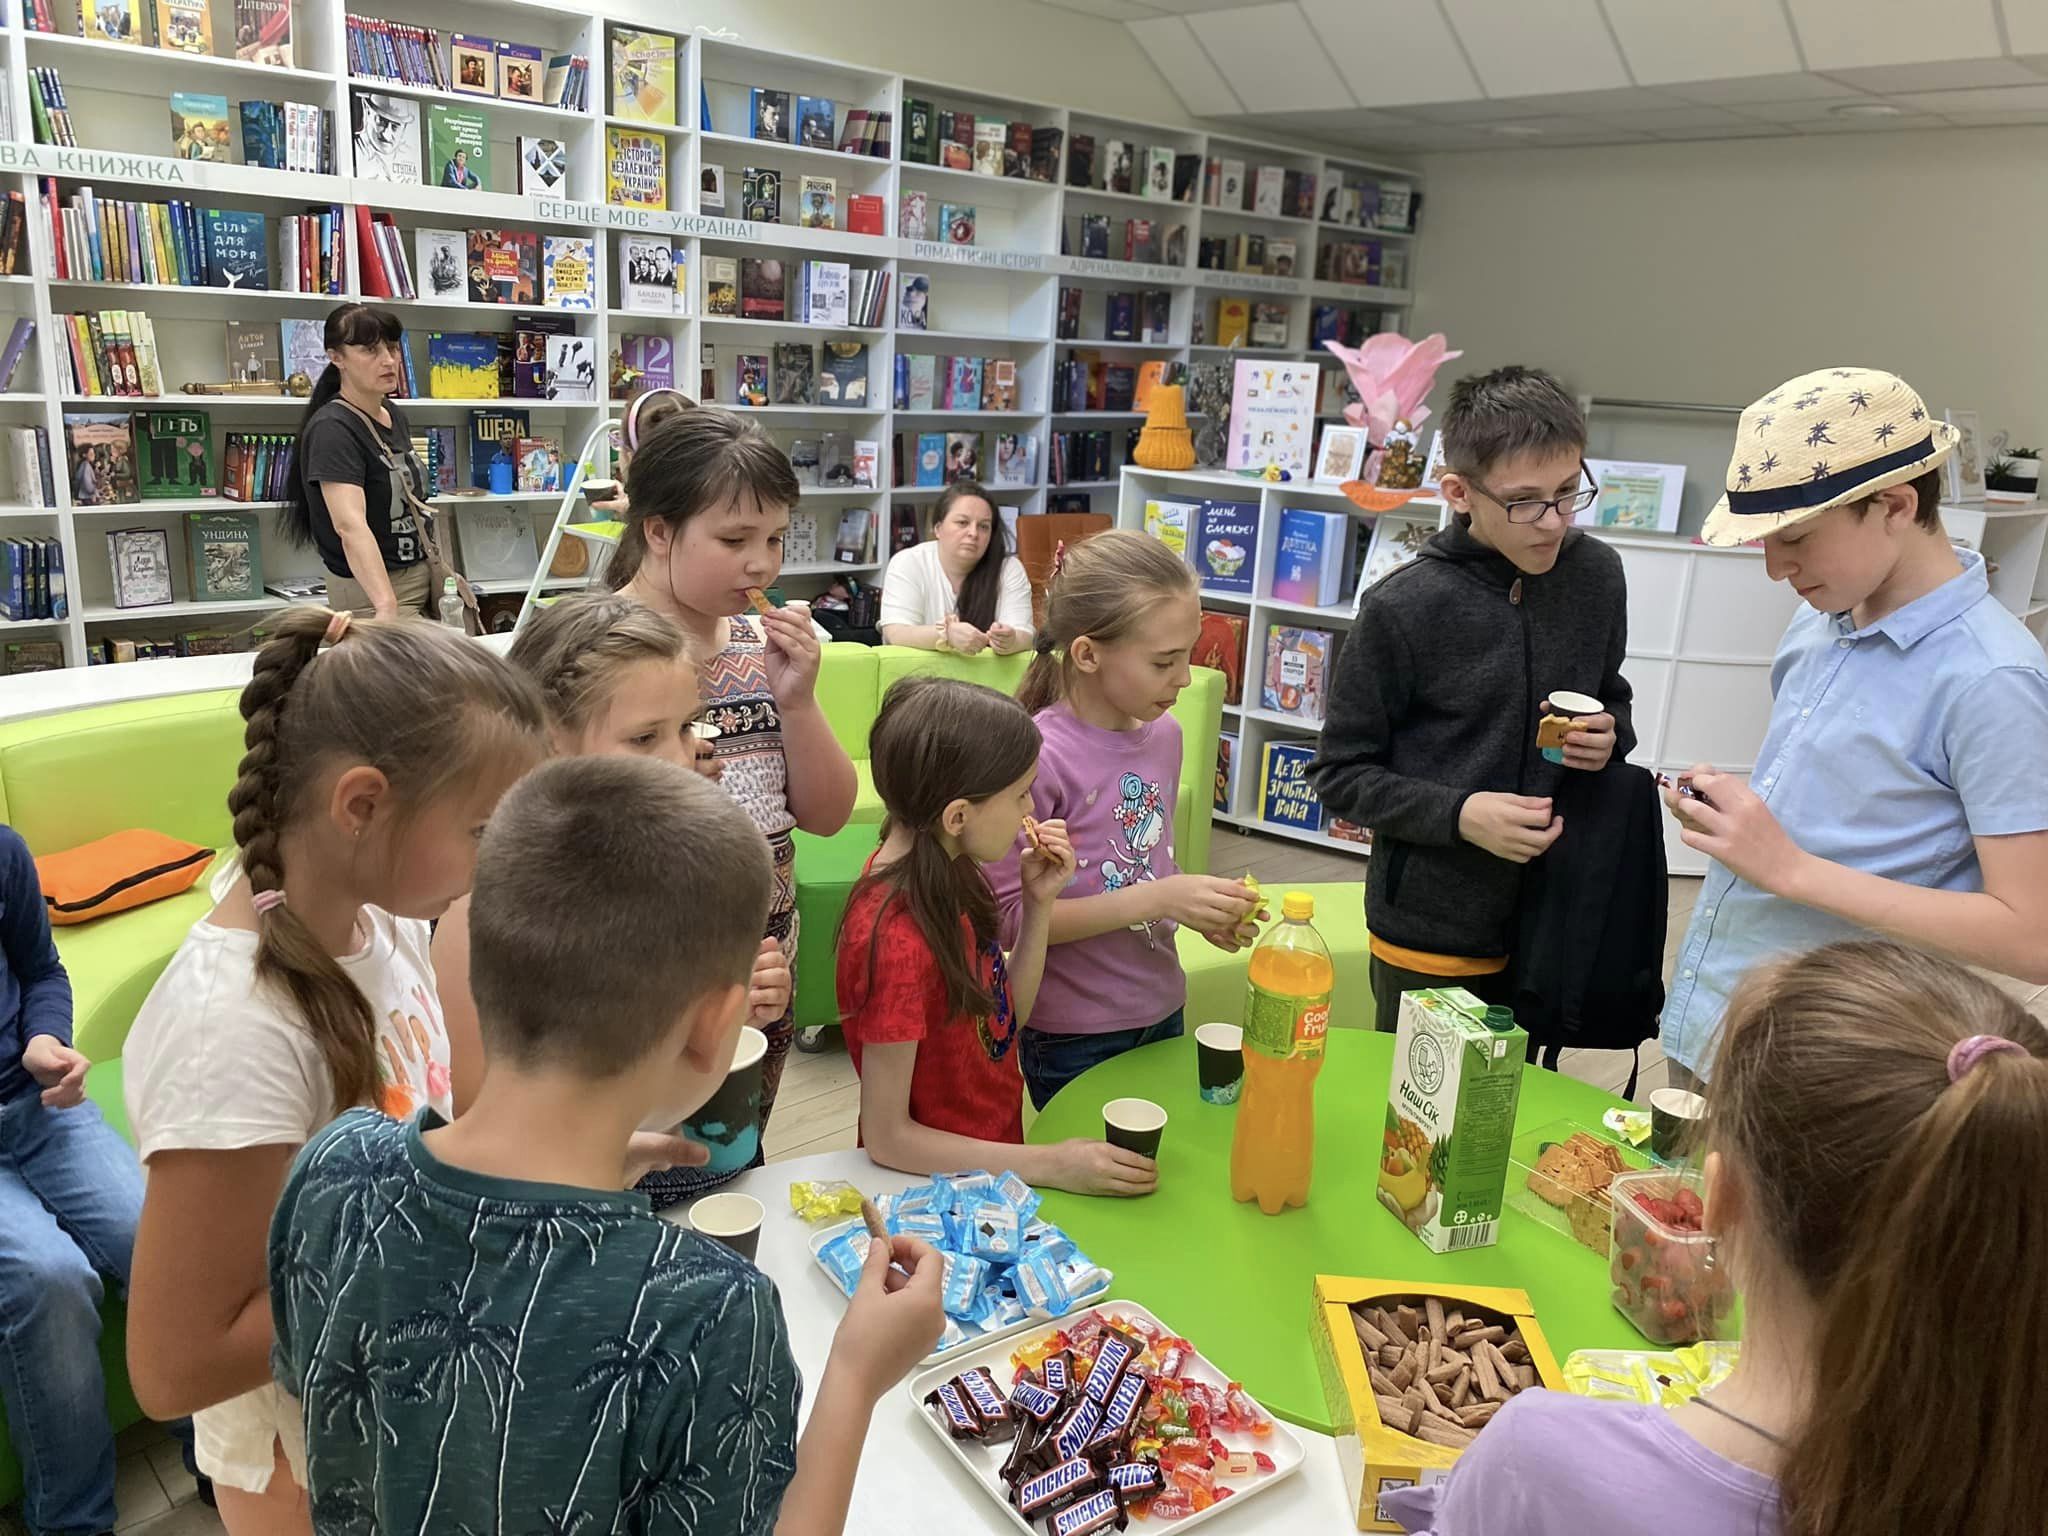 The Center for Modern Reading "Marko" turned one year old